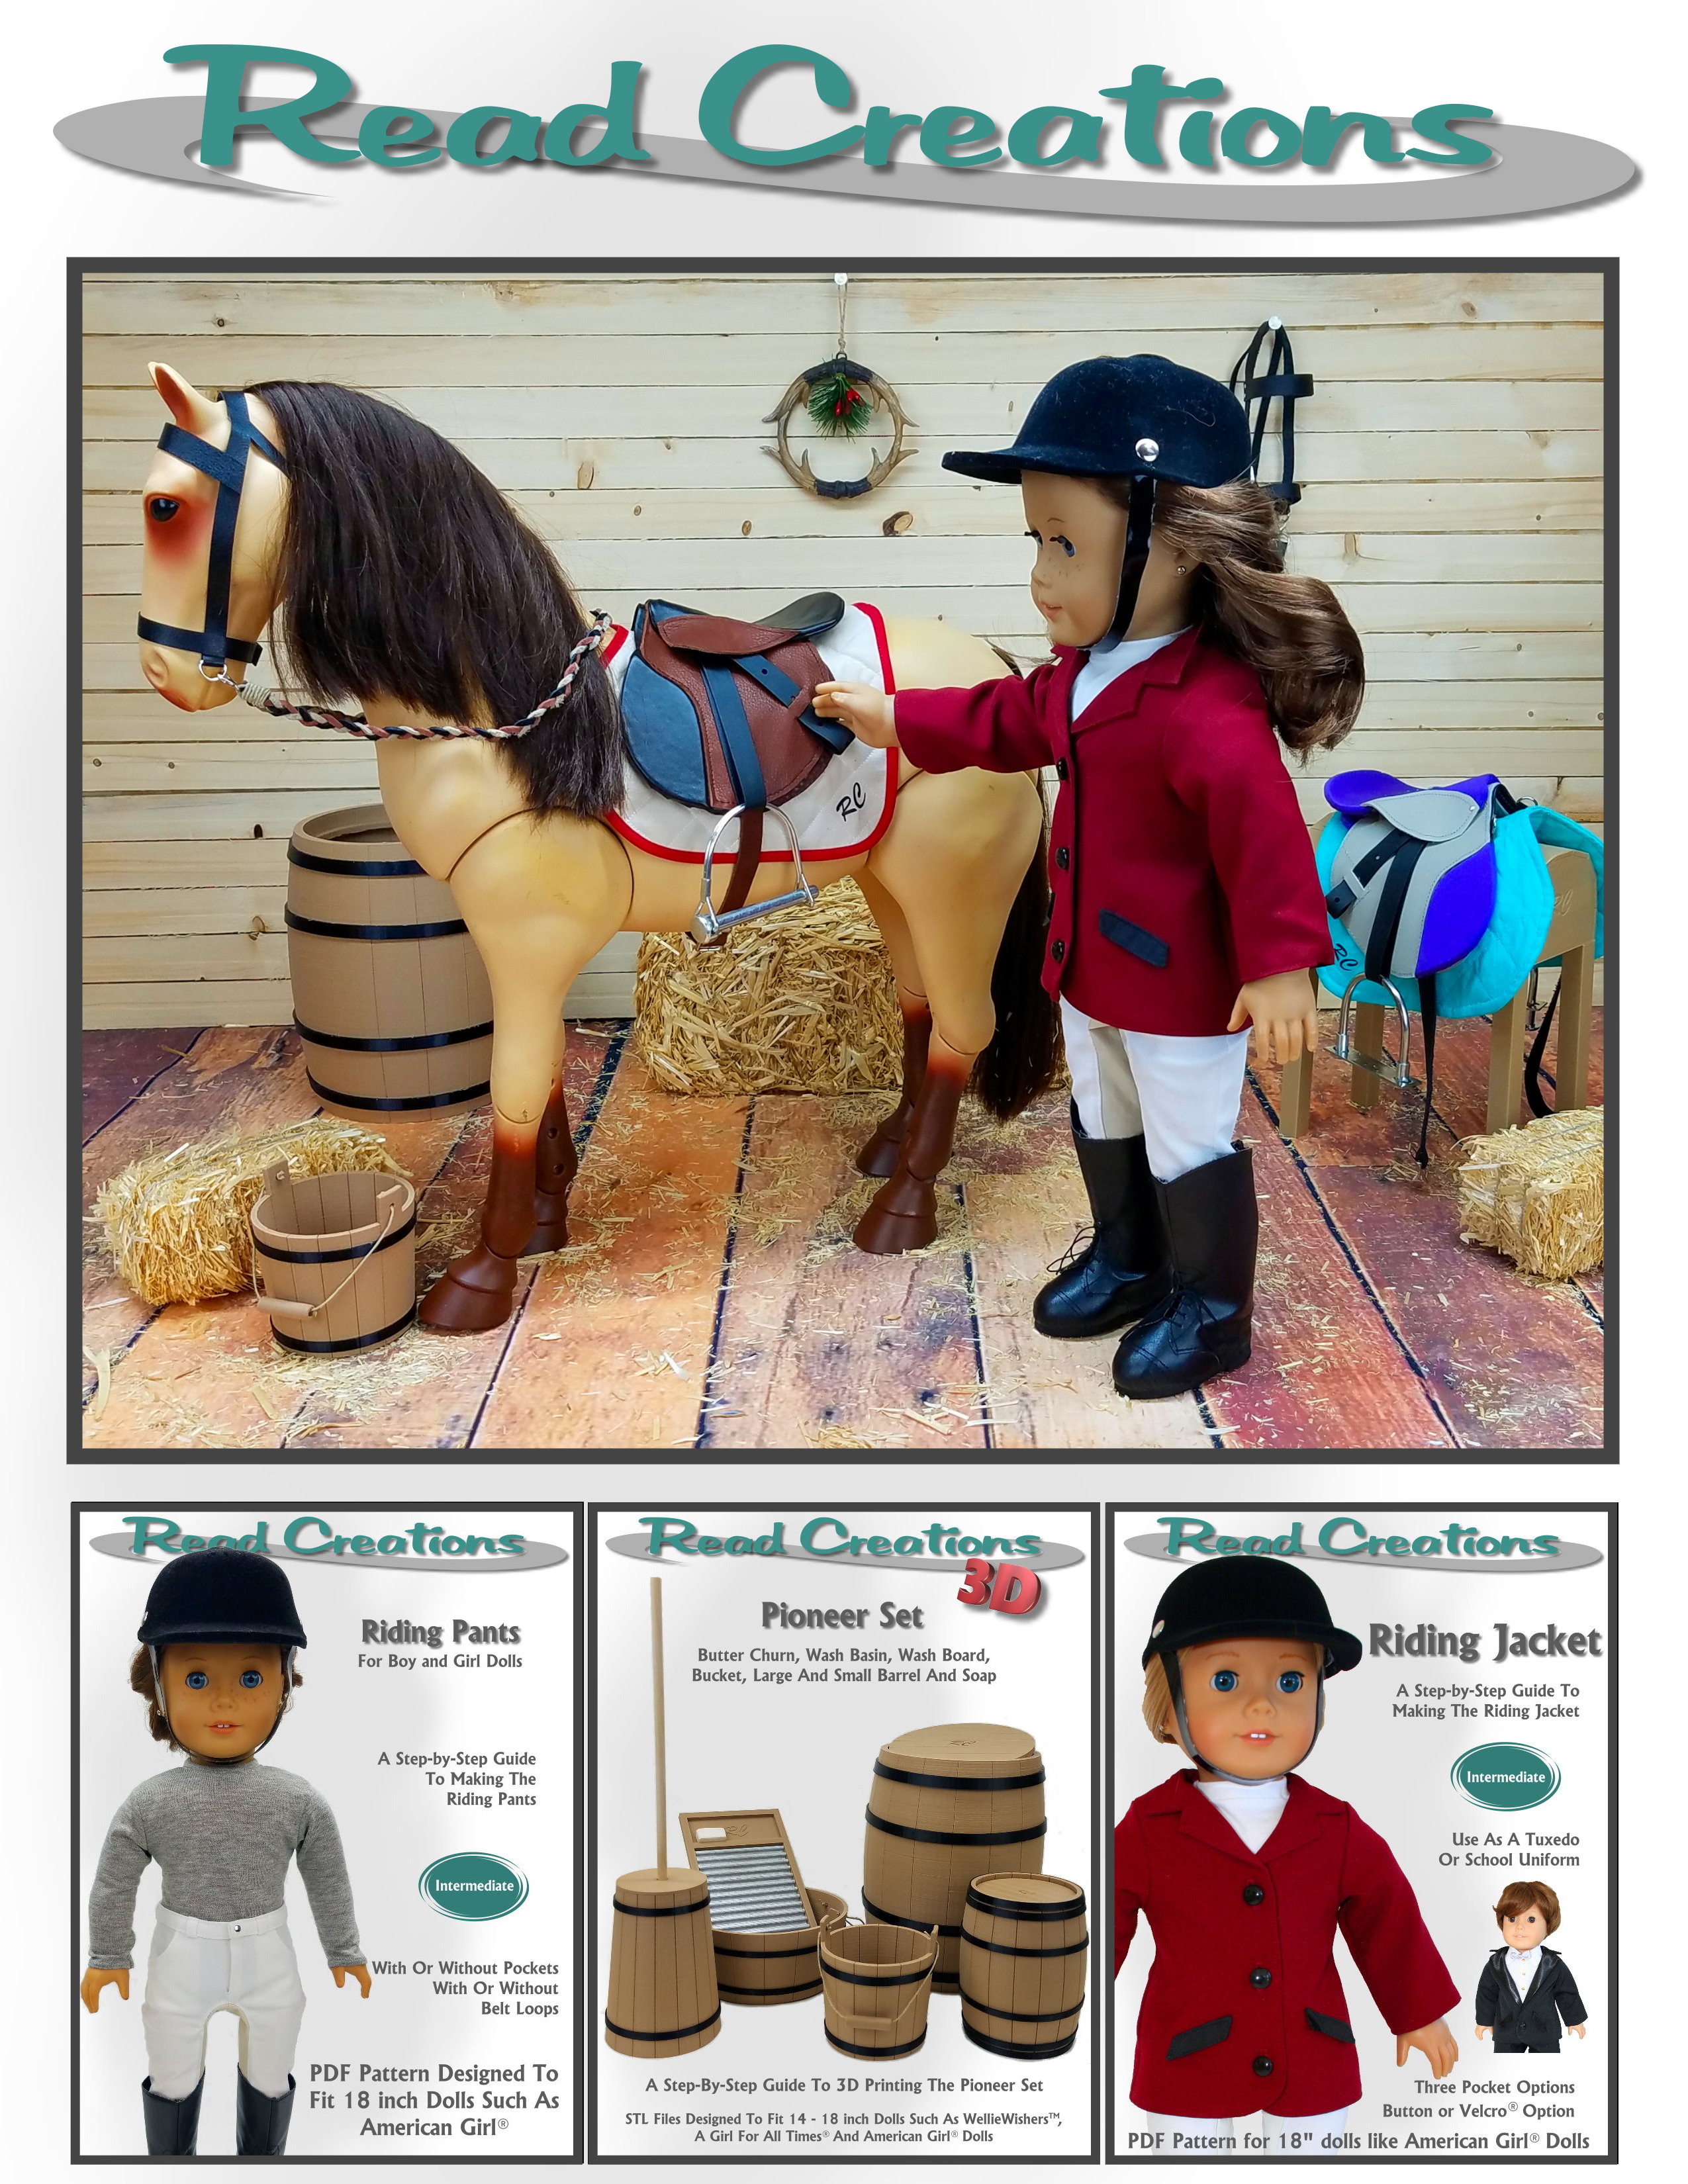 18 inch doll horse riding outfit